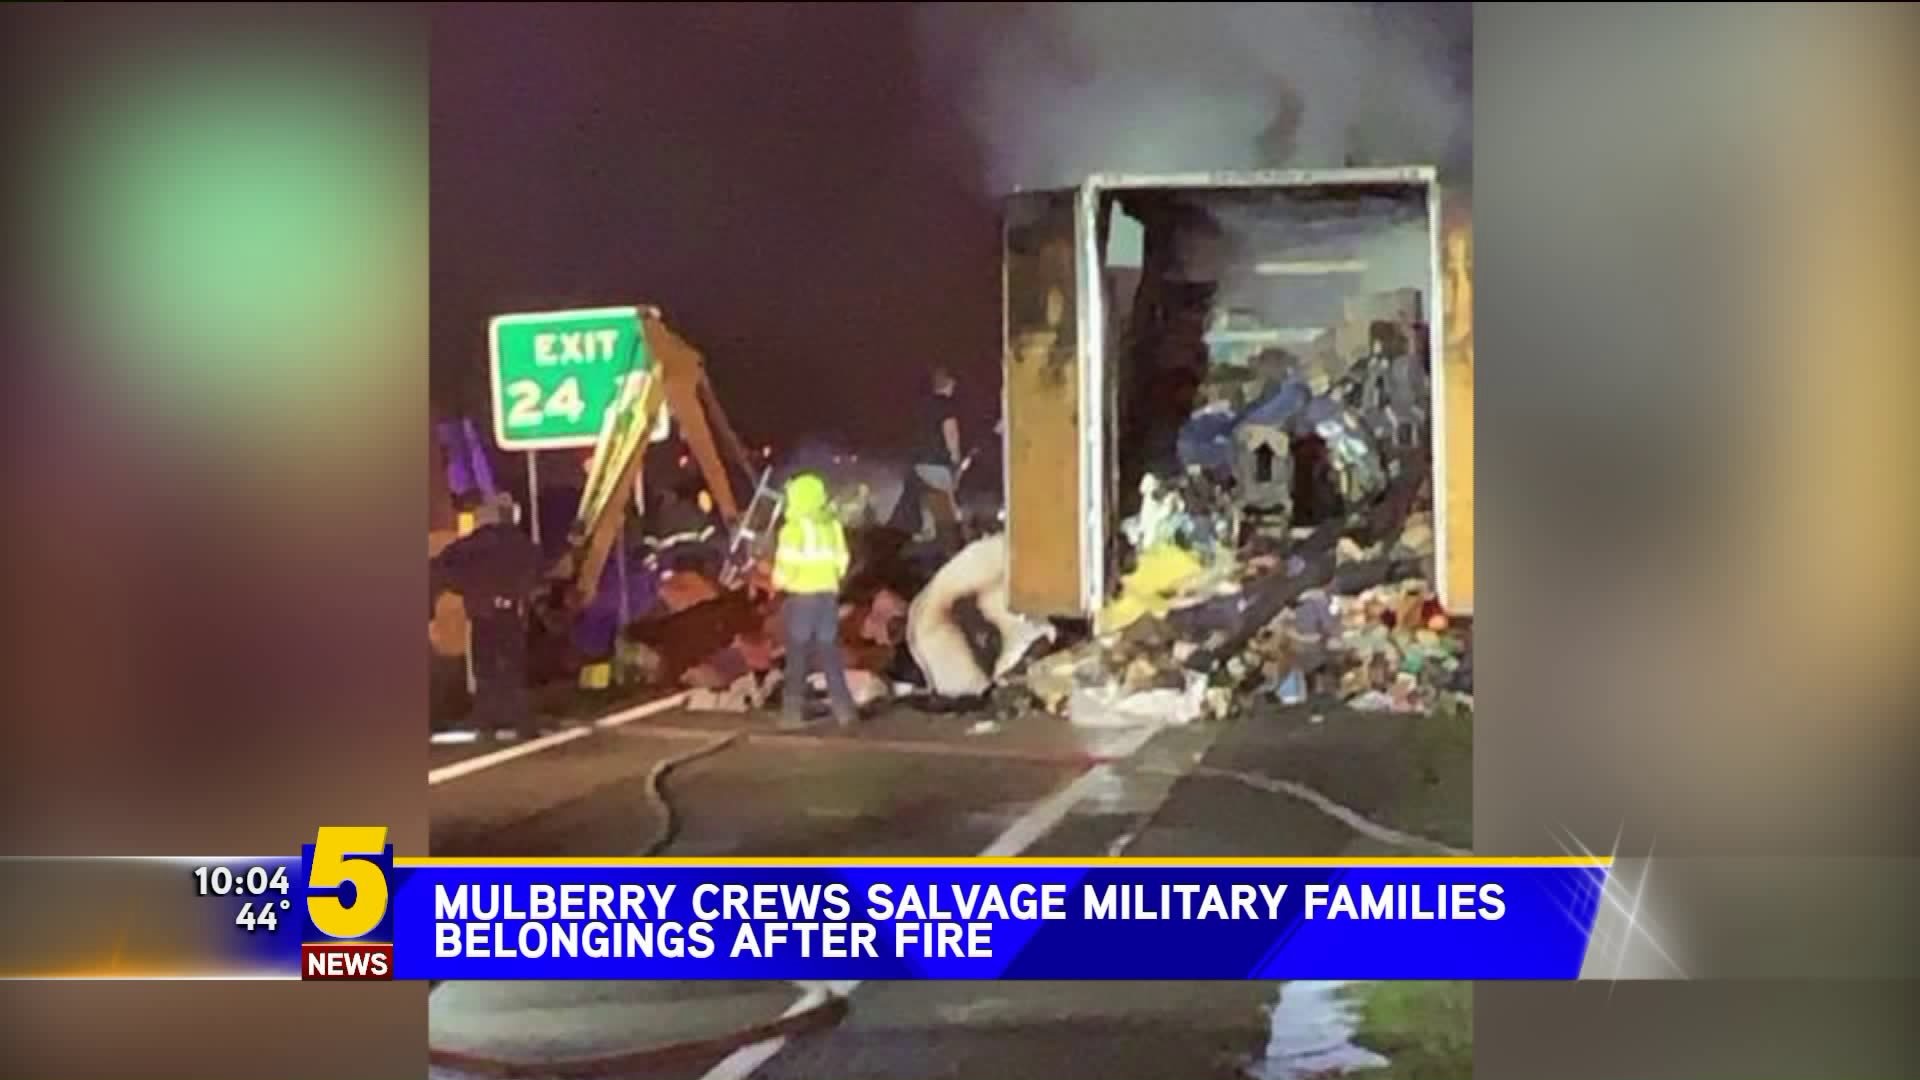 Mulberry crews salvage military families belongings after fire